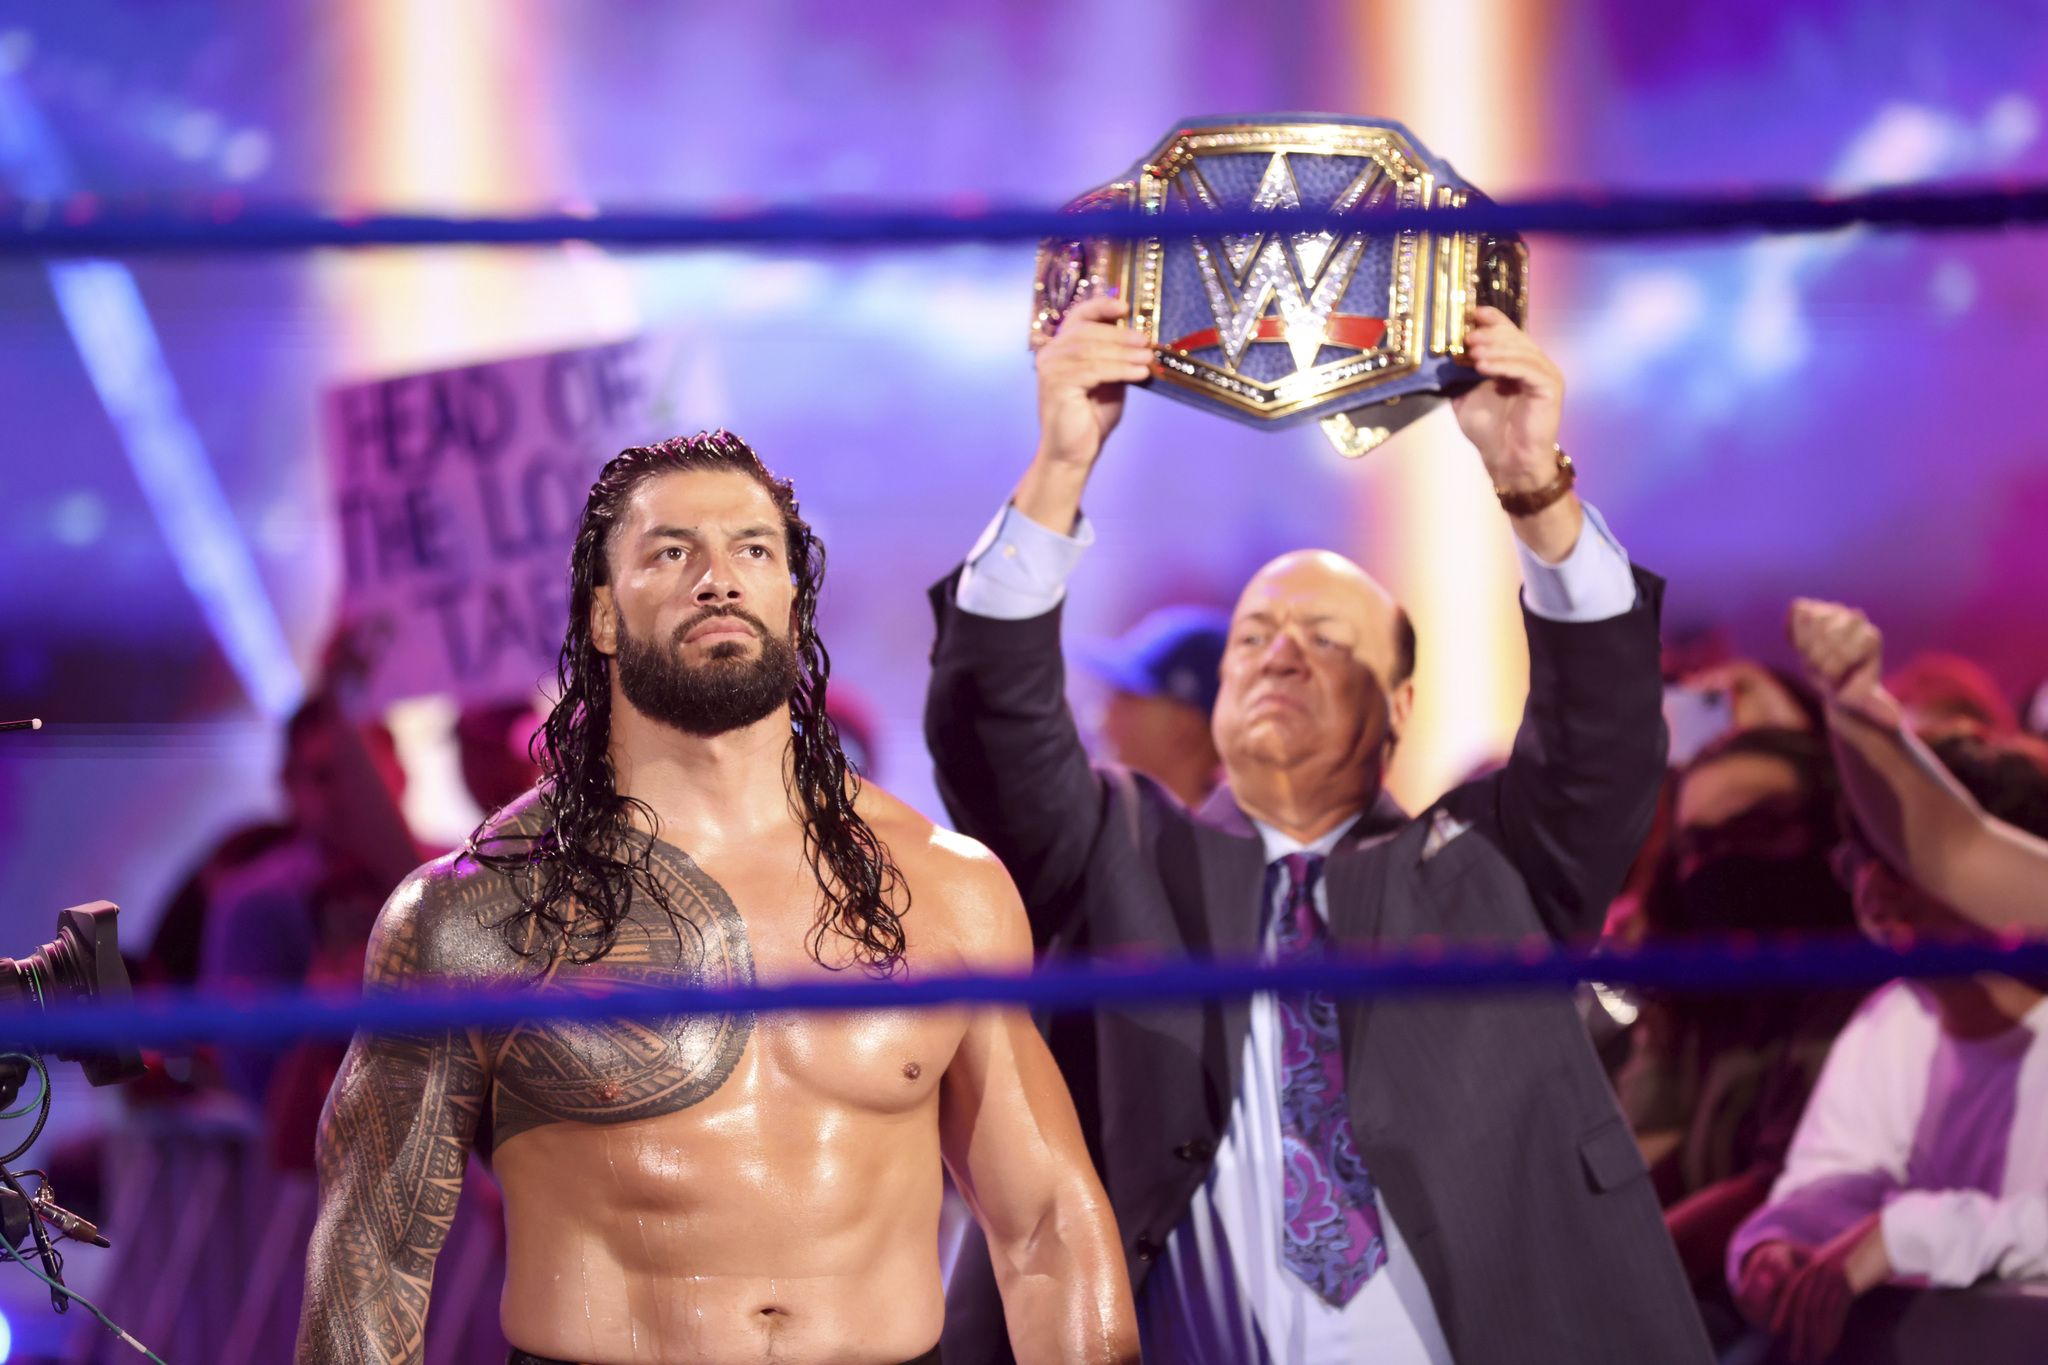 Roman Reigns Xnxx Videos - WWE's Roman Reigns Shared His Diet and Workout to Build Muscle